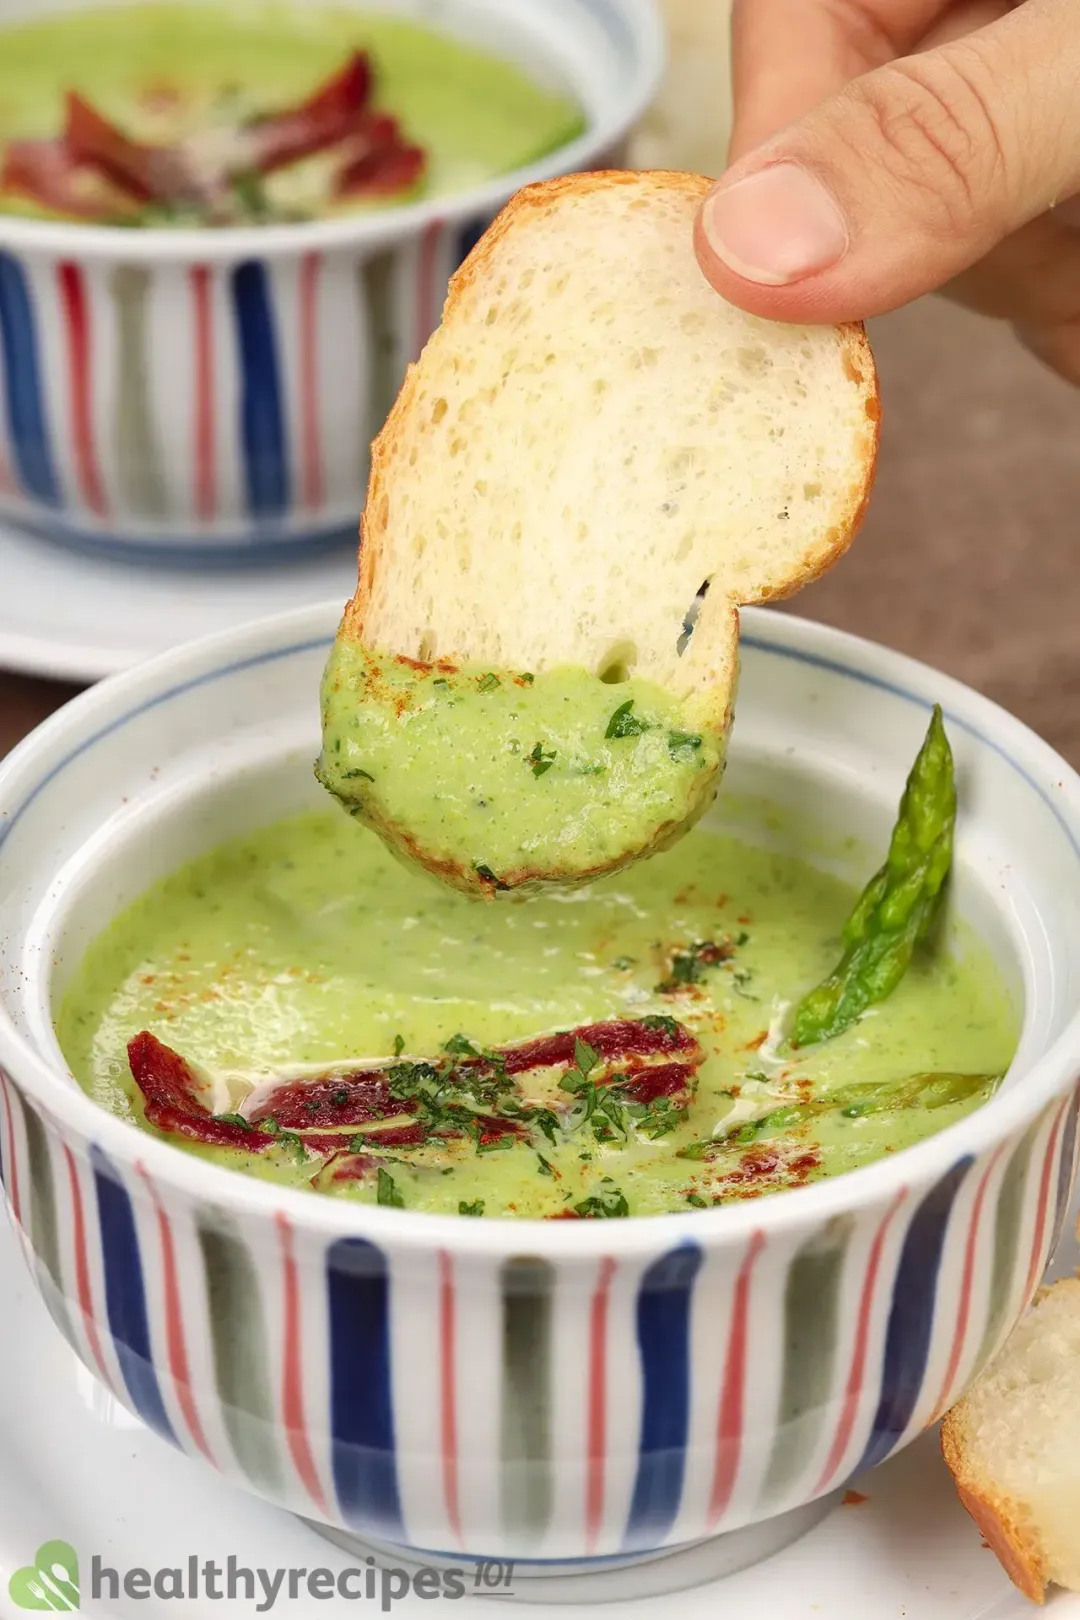 Is Cream of Asparagus Soup Healthy